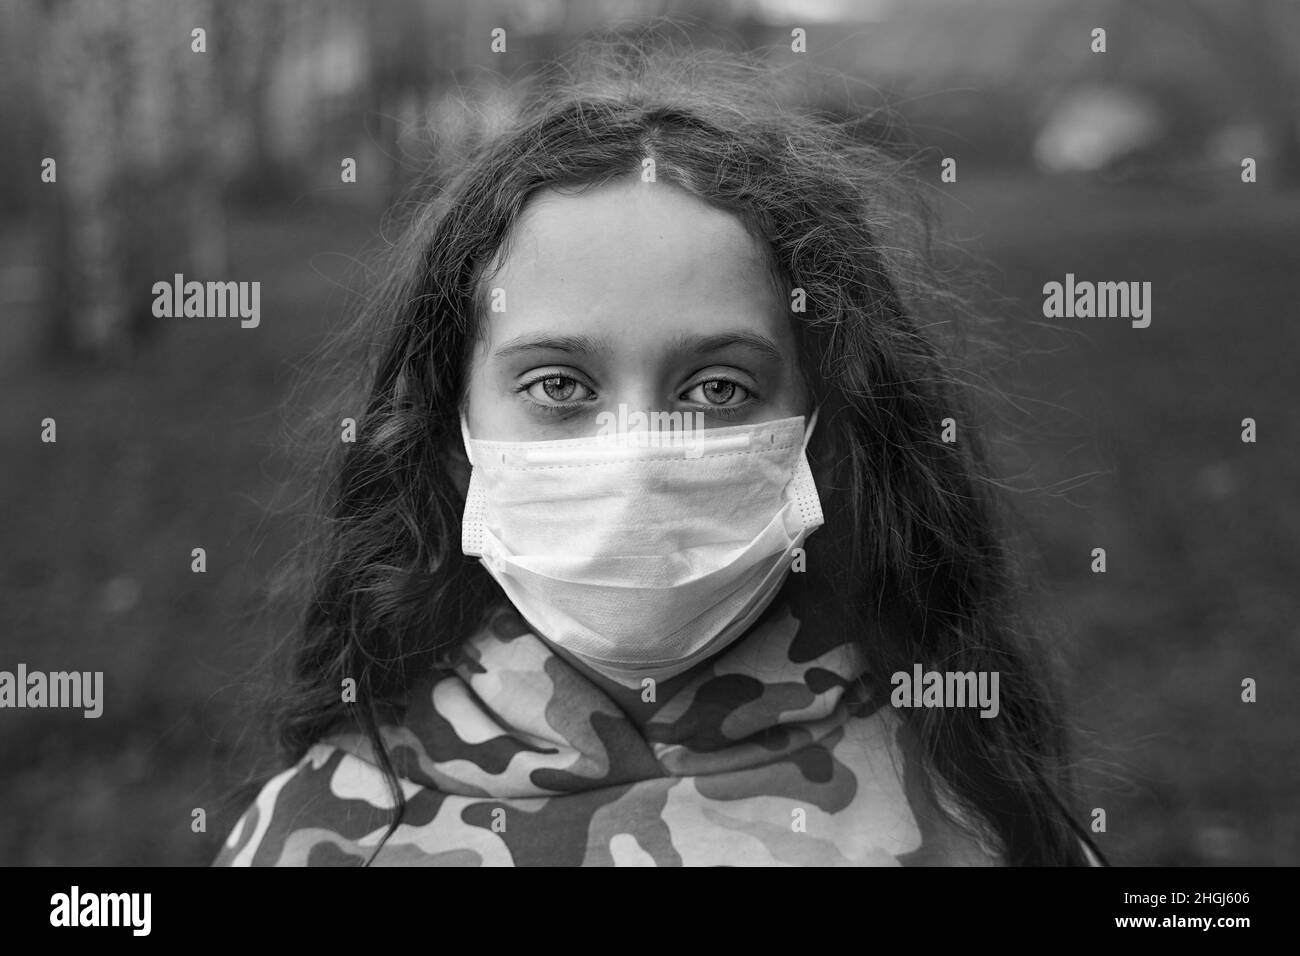 Black and white portrait sad girl  in a medical mask. Pandemic, virus, New normal concept. Stock Photo